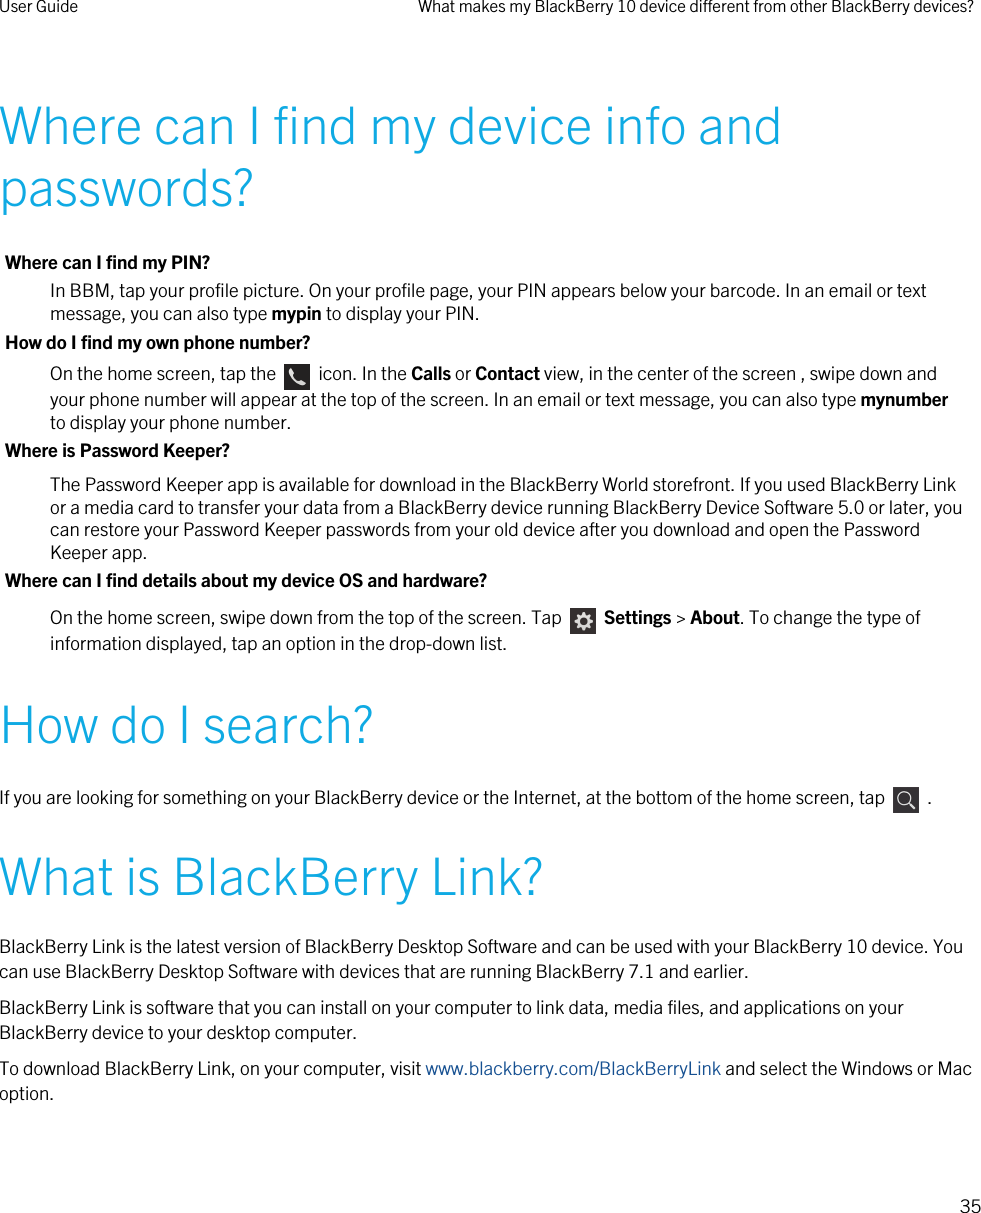 Where can I find my device info and passwords?Where can I find my PIN?In BBM, tap your profile picture. On your profile page, your PIN appears below your barcode. In an email or text message, you can also type mypin to display your PIN.How do I find my own phone number?On the home screen, tap the    icon. In the Calls or Contact view, in the center of the screen , swipe down and your phone number will appear at the top of the screen. In an email or text message, you can also type mynumber to display your phone number.Where is Password Keeper?The Password Keeper app is available for download in the BlackBerry World storefront. If you used BlackBerry Link or a media card to transfer your data from a BlackBerry device running BlackBerry Device Software 5.0 or later, you can restore your Password Keeper passwords from your old device after you download and open the Password Keeper app.Where can I find details about my device OS and hardware?On the home screen, swipe down from the top of the screen. Tap    Settings &gt; About. To change the type of information displayed, tap an option in the drop-down list.How do I search?If you are looking for something on your BlackBerry device or the Internet, at the bottom of the home screen, tap    .What is BlackBerry Link?BlackBerry Link is the latest version of BlackBerry Desktop Software and can be used with your BlackBerry 10 device. You can use BlackBerry Desktop Software with devices that are running BlackBerry 7.1 and earlier.BlackBerry Link is software that you can install on your computer to link data, media files, and applications on your BlackBerry device to your desktop computer.To download BlackBerry Link, on your computer, visit www.blackberry.com/BlackBerryLink and select the Windows or Mac option.User Guide What makes my BlackBerry 10 device different from other BlackBerry devices?35 